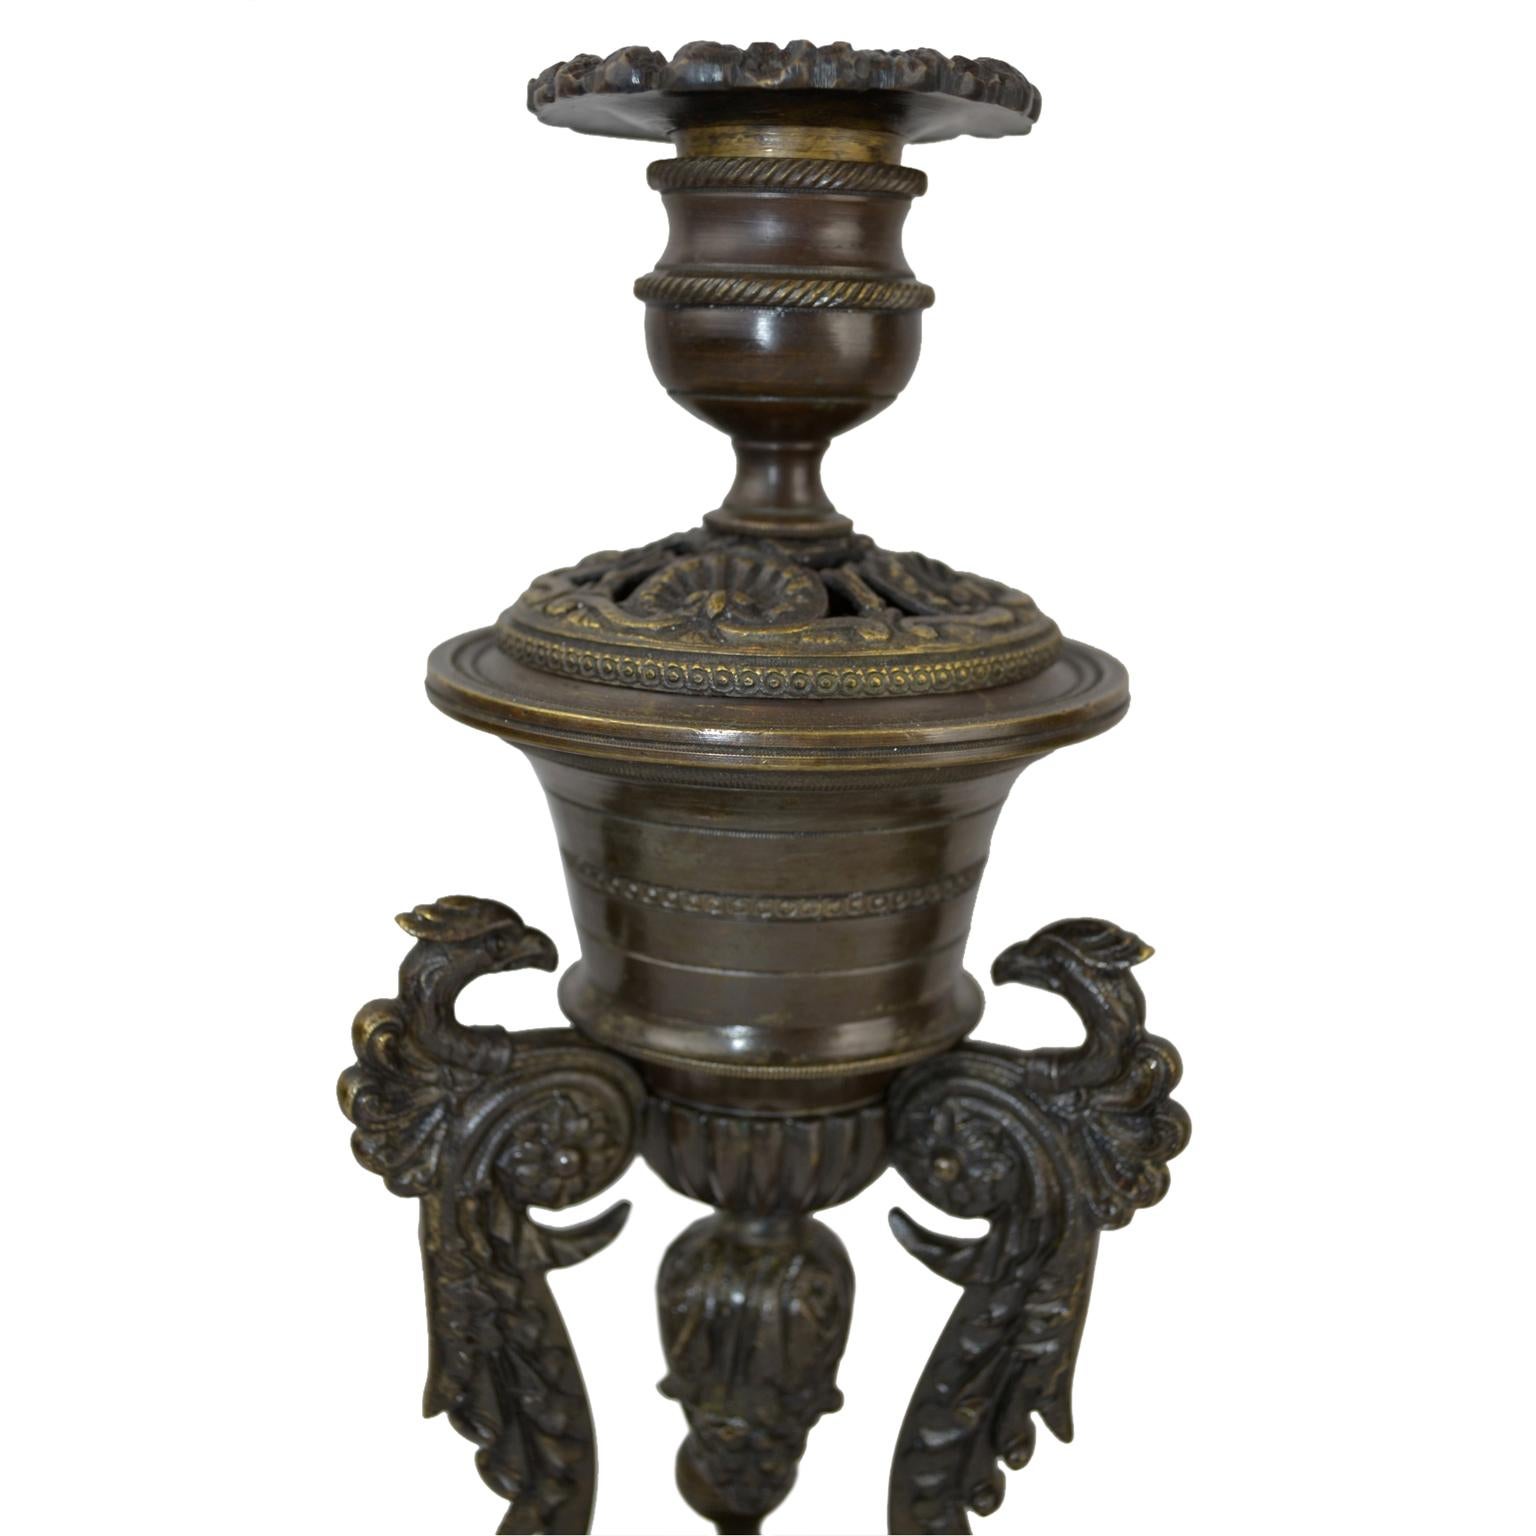 An unusual pair of patinated bronze insence burners and/or candlesticks. The triform base sits on lions paw feet. Each corner of the base supports a stylized winged eagle with one foot on a ball. The eagles in turn support a round tapering 'vase'